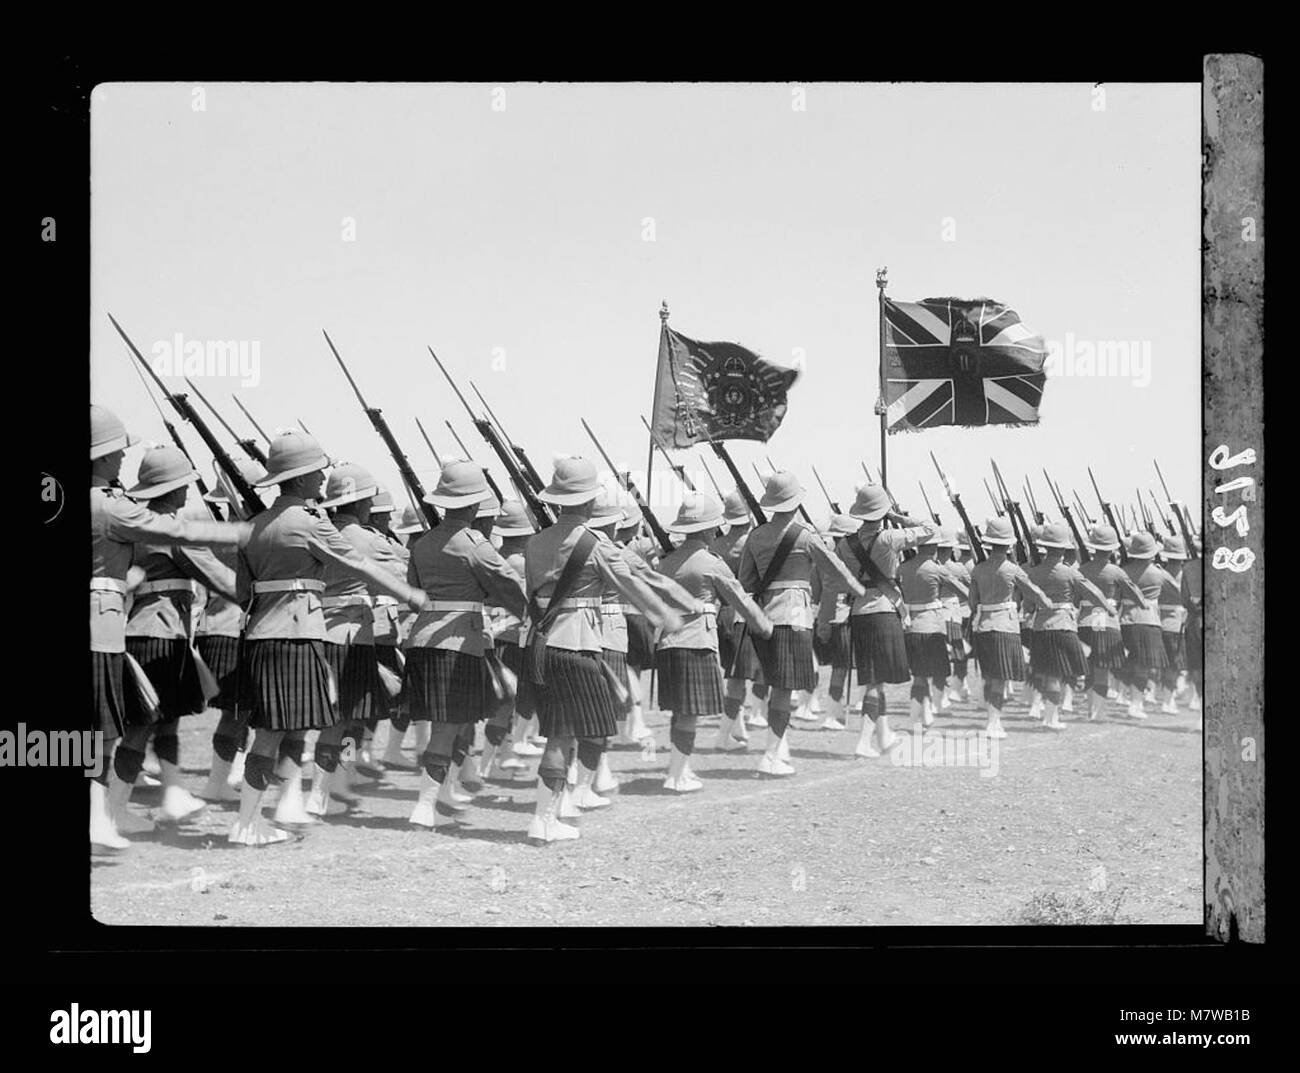 King's birthday celebration. Scotch (i.e., Scots) regiment with the National Standard and their regimental colours LOC matpc.18144 Stock Photo